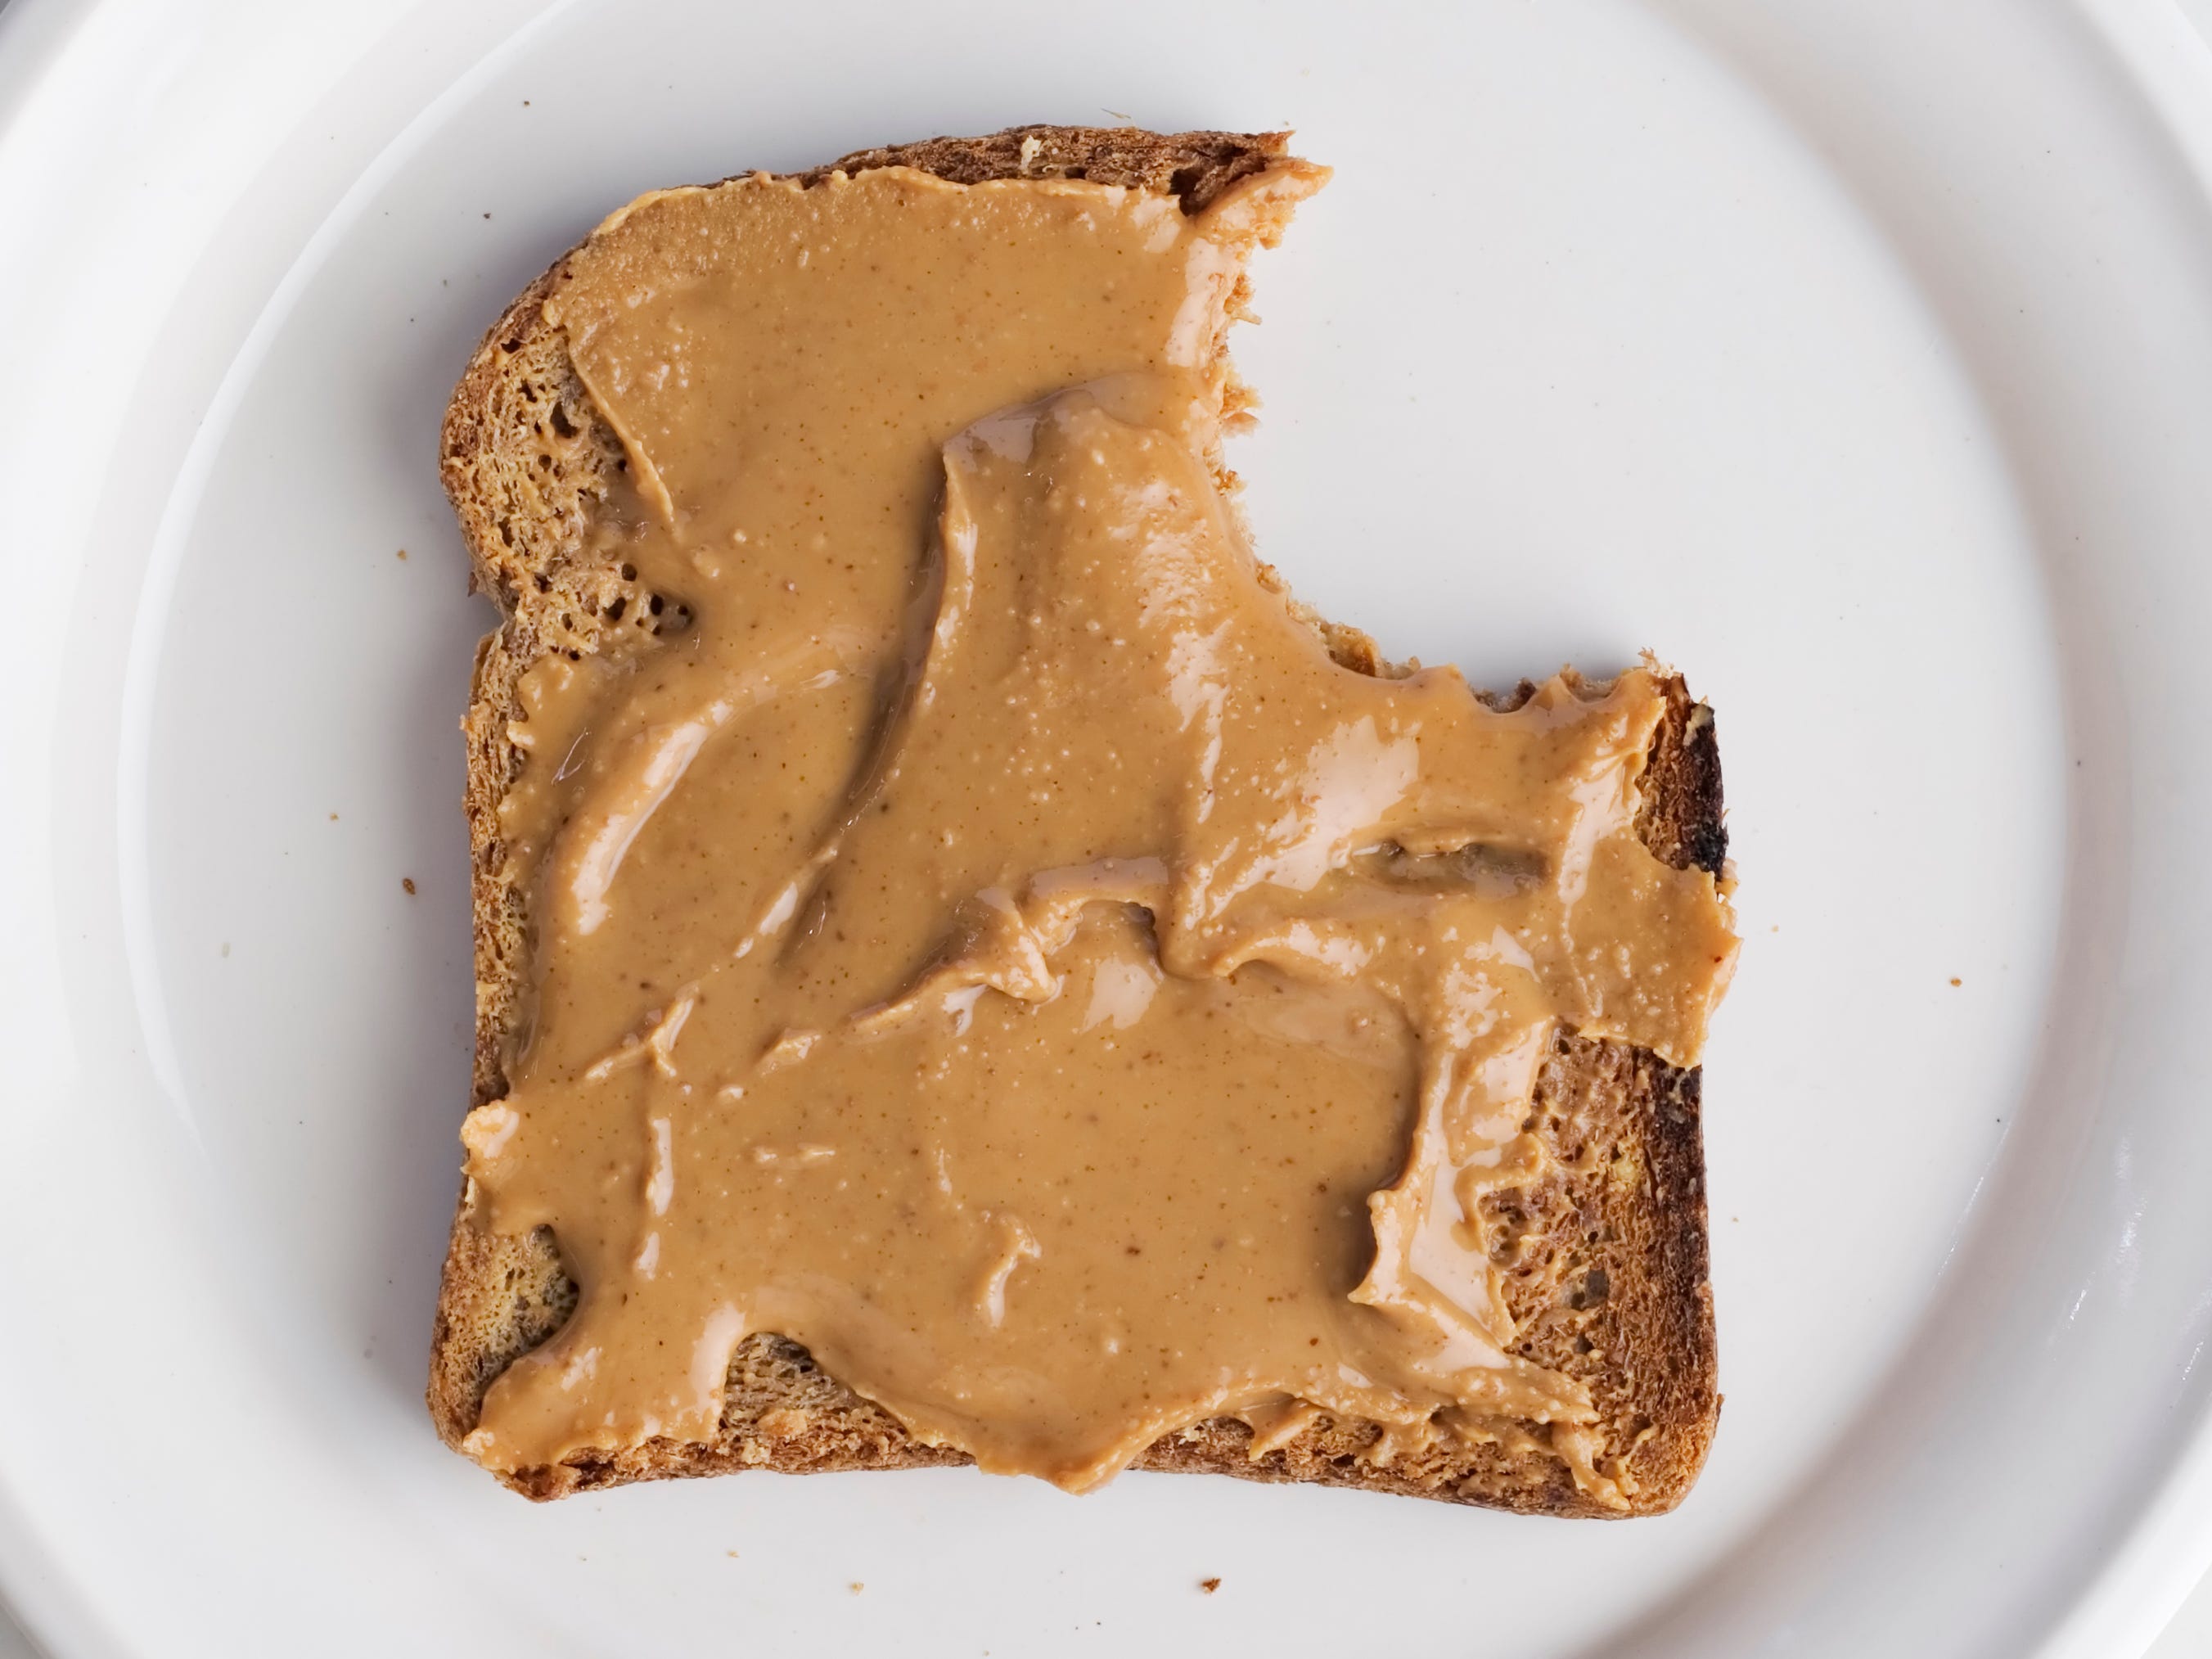 <p><a href="https://www.healthline.com/nutrition/is-peanut-butter-bad-for-you#TOC_TITLE_HDR_5">Peanut butter</a> is low in carbs, and it can be a great source of protein and "healthy" fats. </p><p>"My favorite high-protein food for weight loss is peanut butter," <a href="https://dietitianthyme.com/">registered dietitian nutritionist Rebecca Stib</a> told Insider. "Per a serving (which is typically 2 tablespoons), you'll get about <a href="https://fdc.nal.usda.gov/fdc-app.html#/food-details/1100559/nutrients">8 grams</a> of protein."</p>